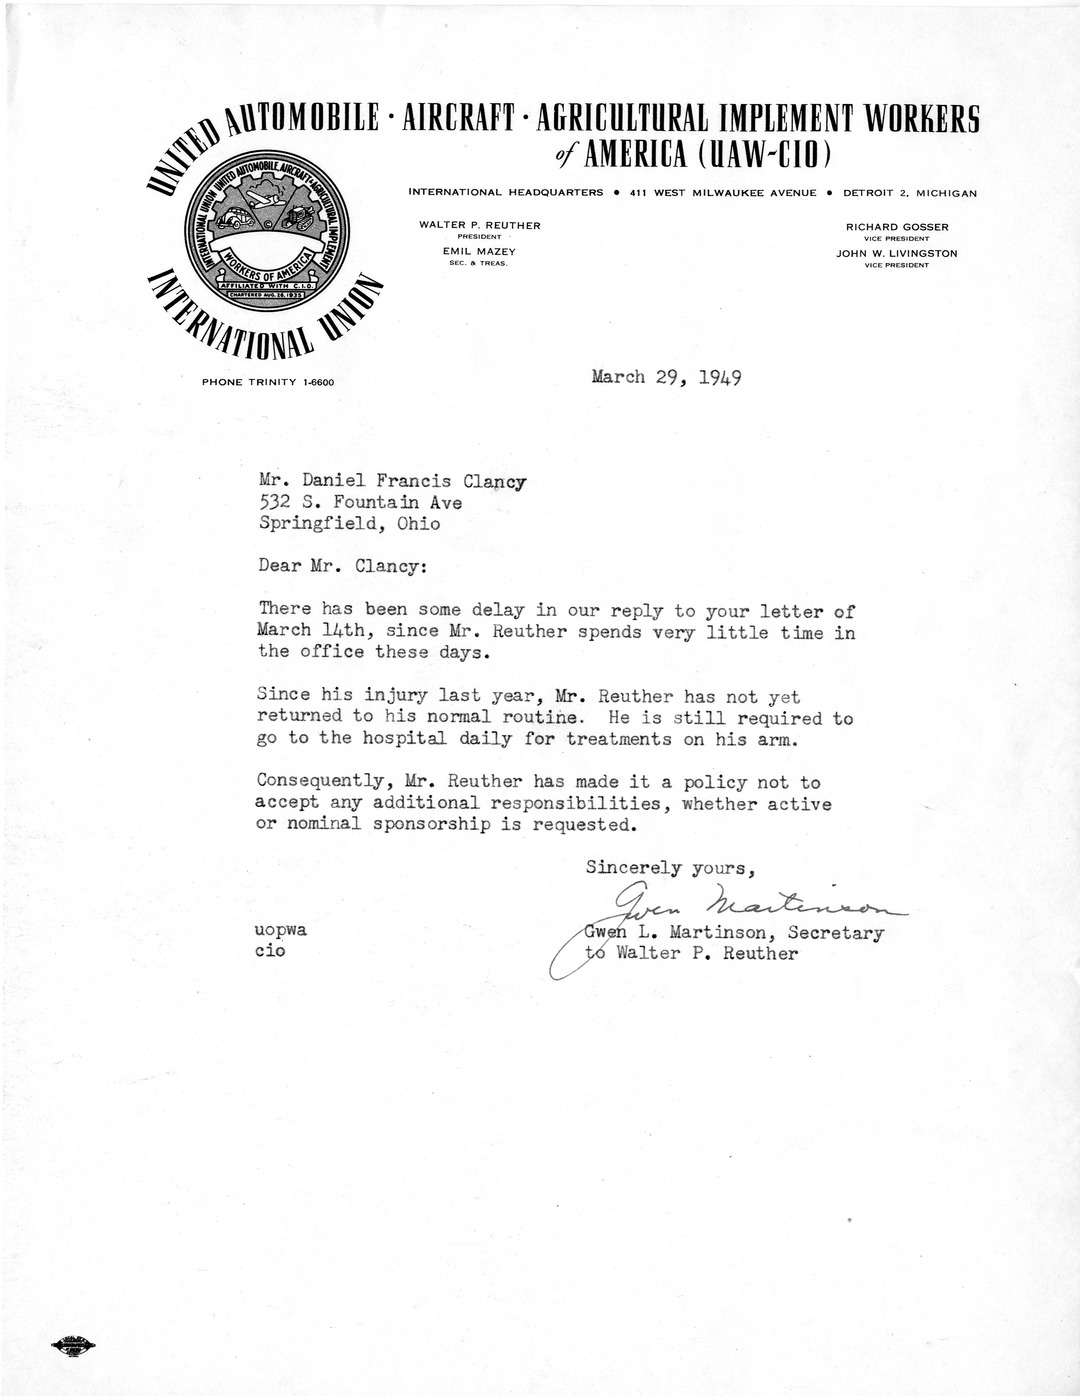 Letter from Gwen L. Martinson to Daniel F. Clancy